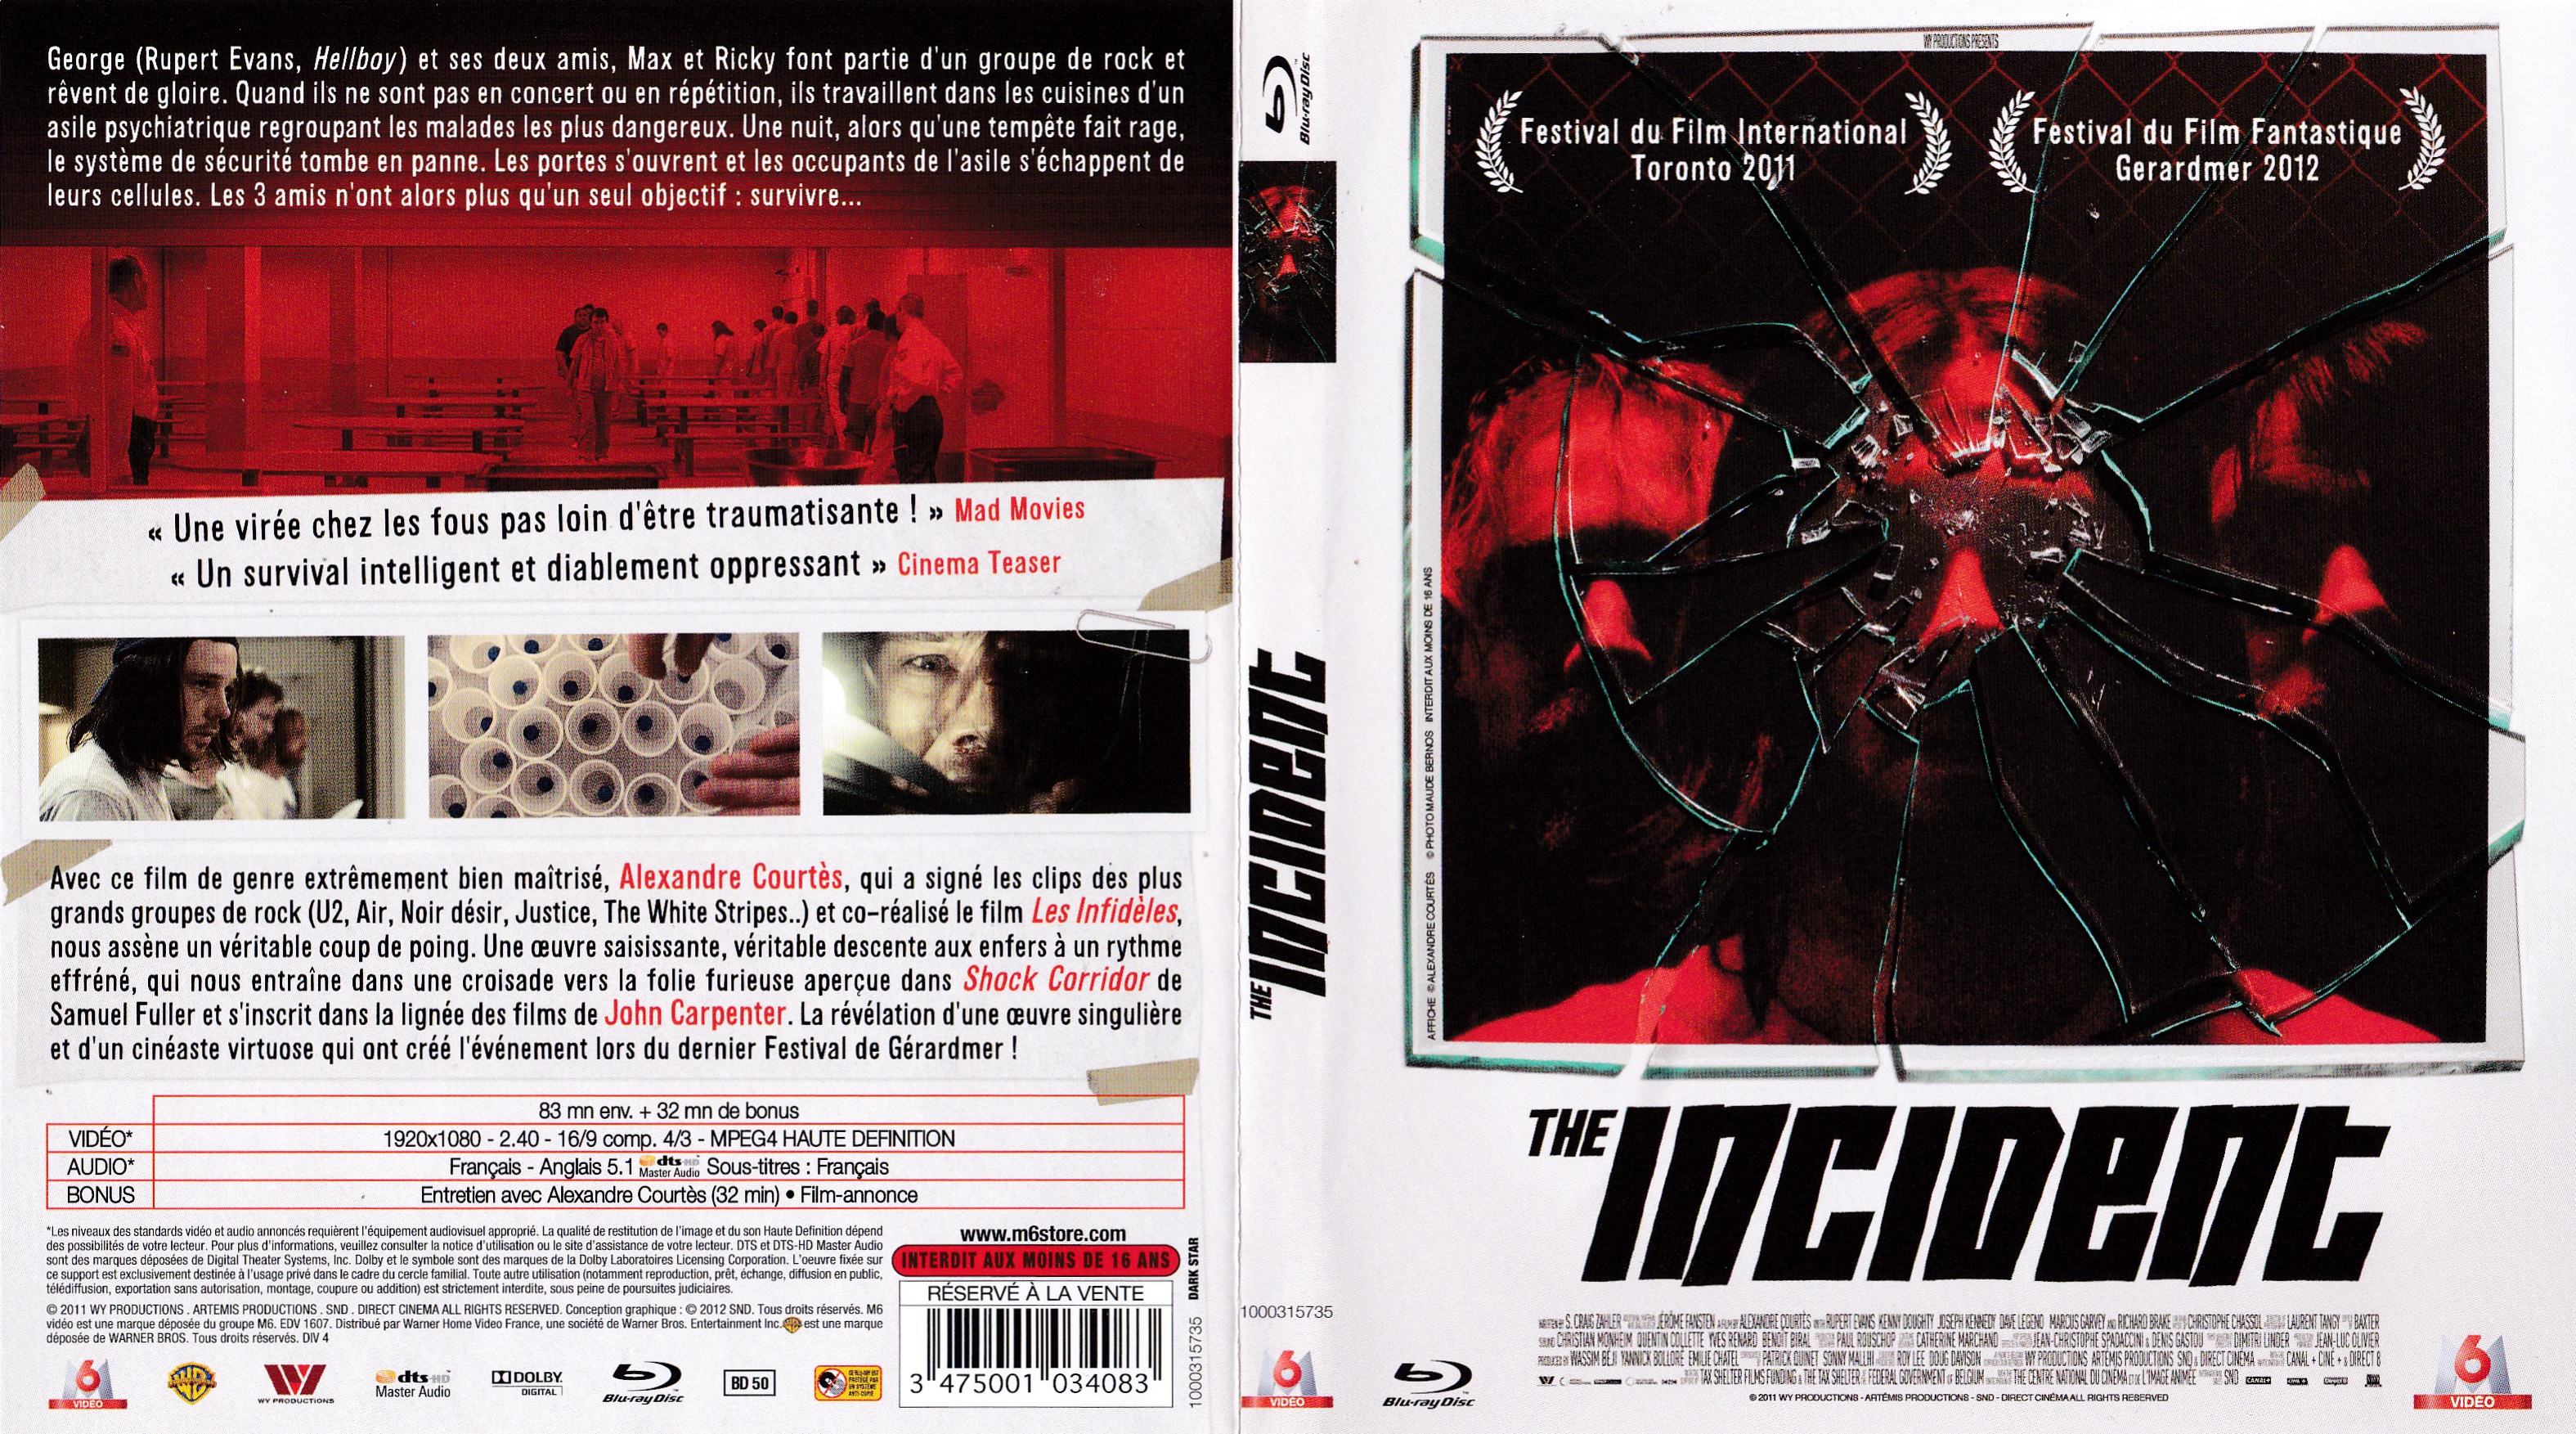 Jaquette DVD The incident (BLU-RAY)